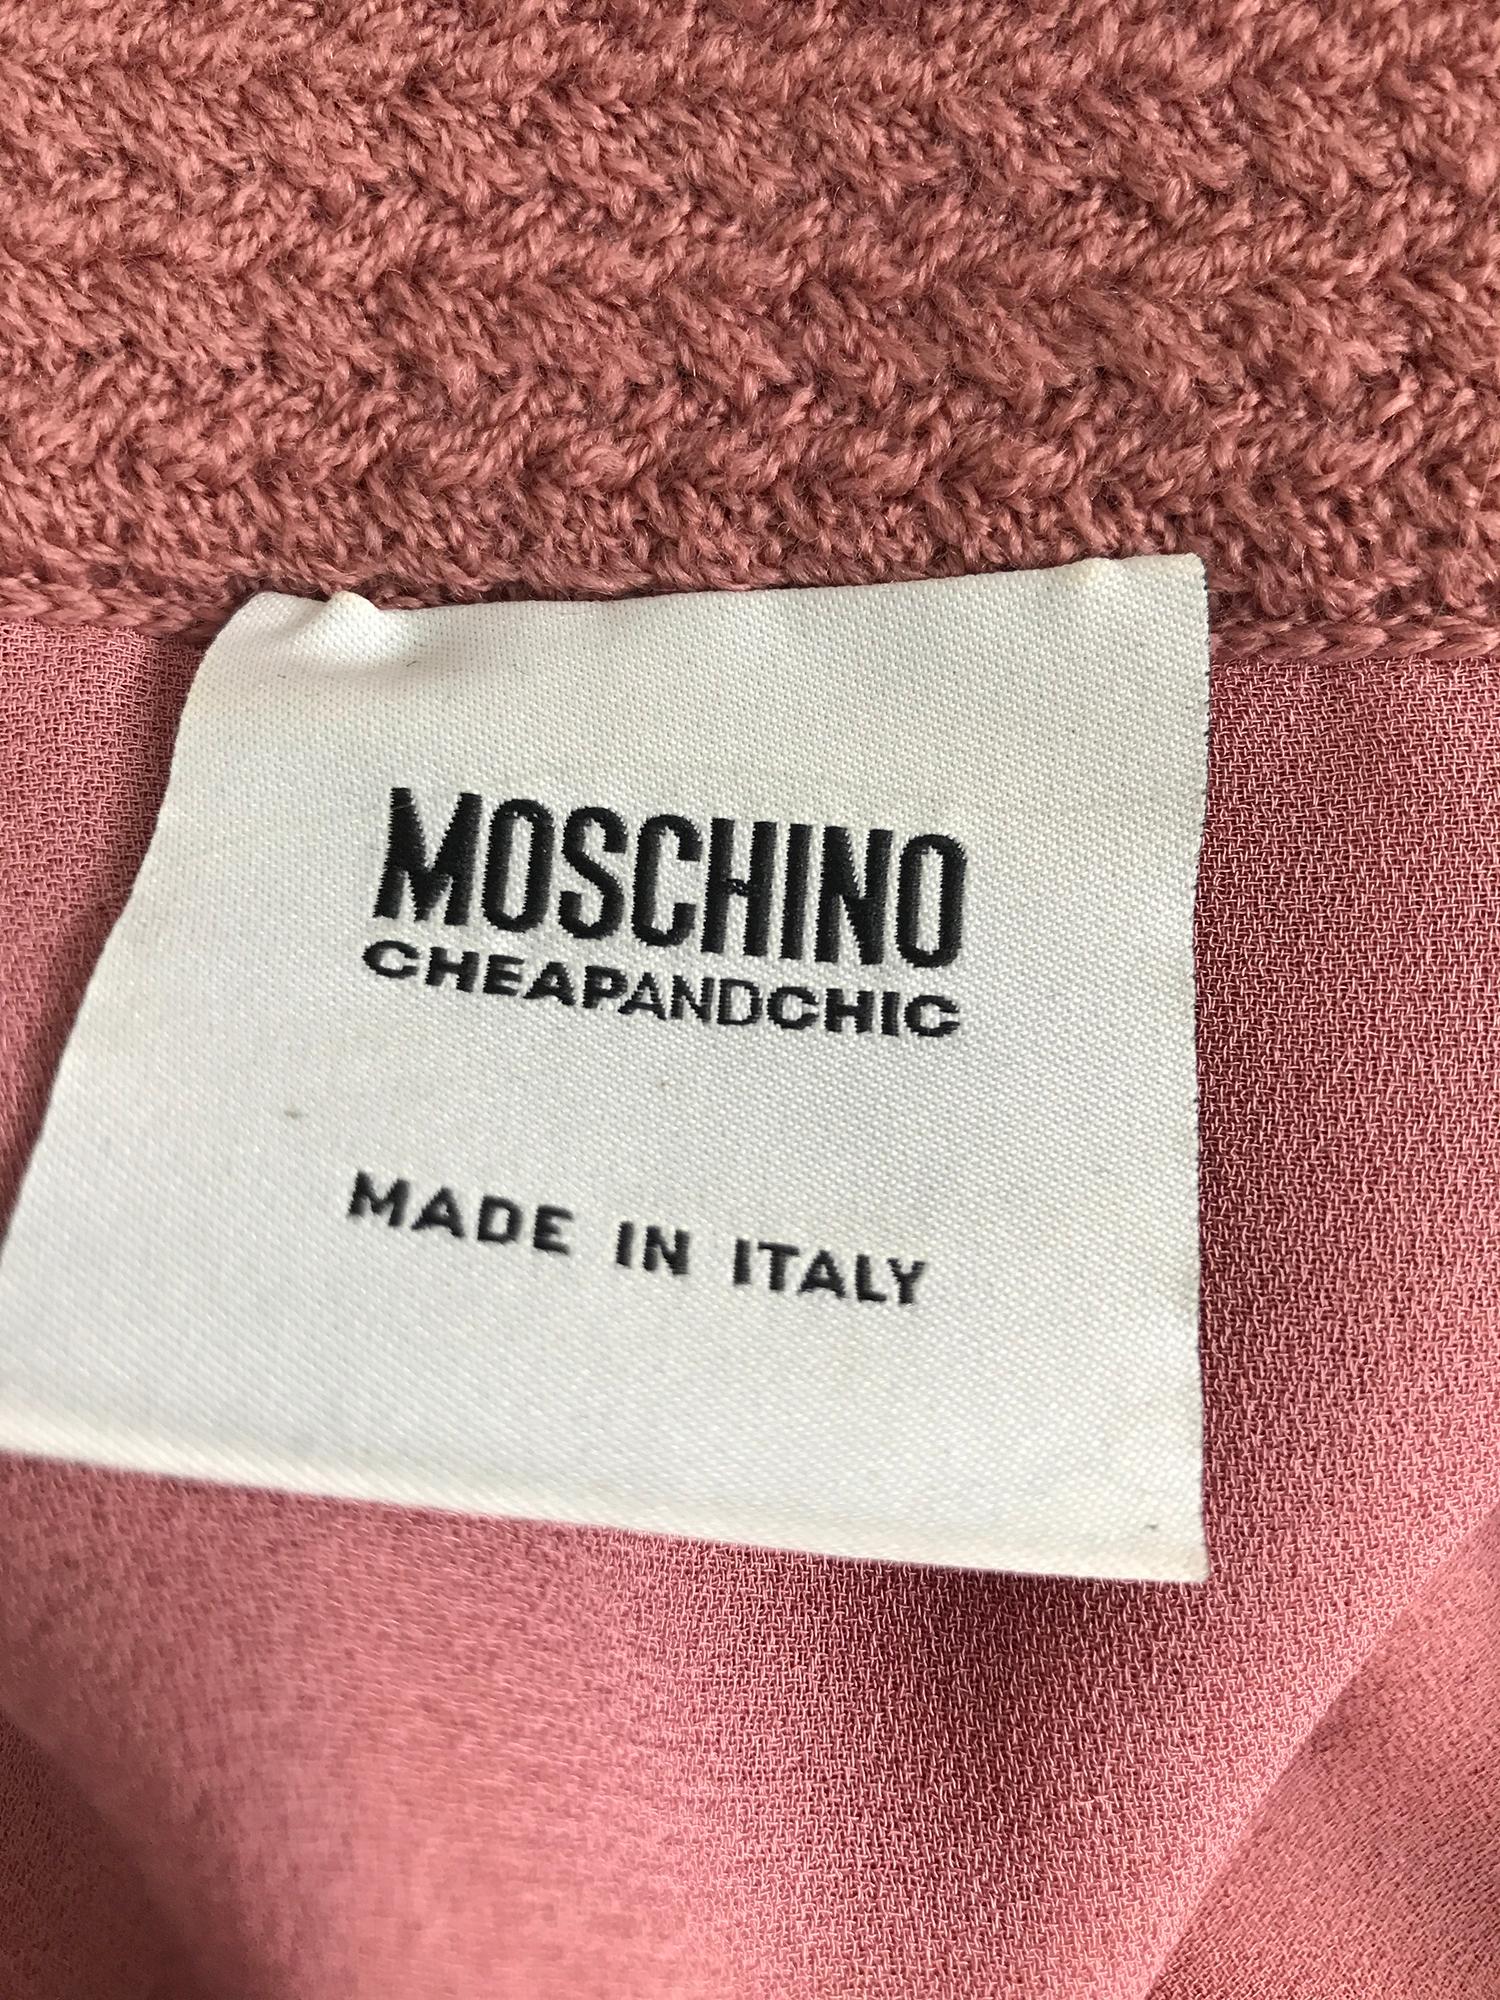 Moschino Pink Wool Knit Coat with Rosette Lace Trims 9